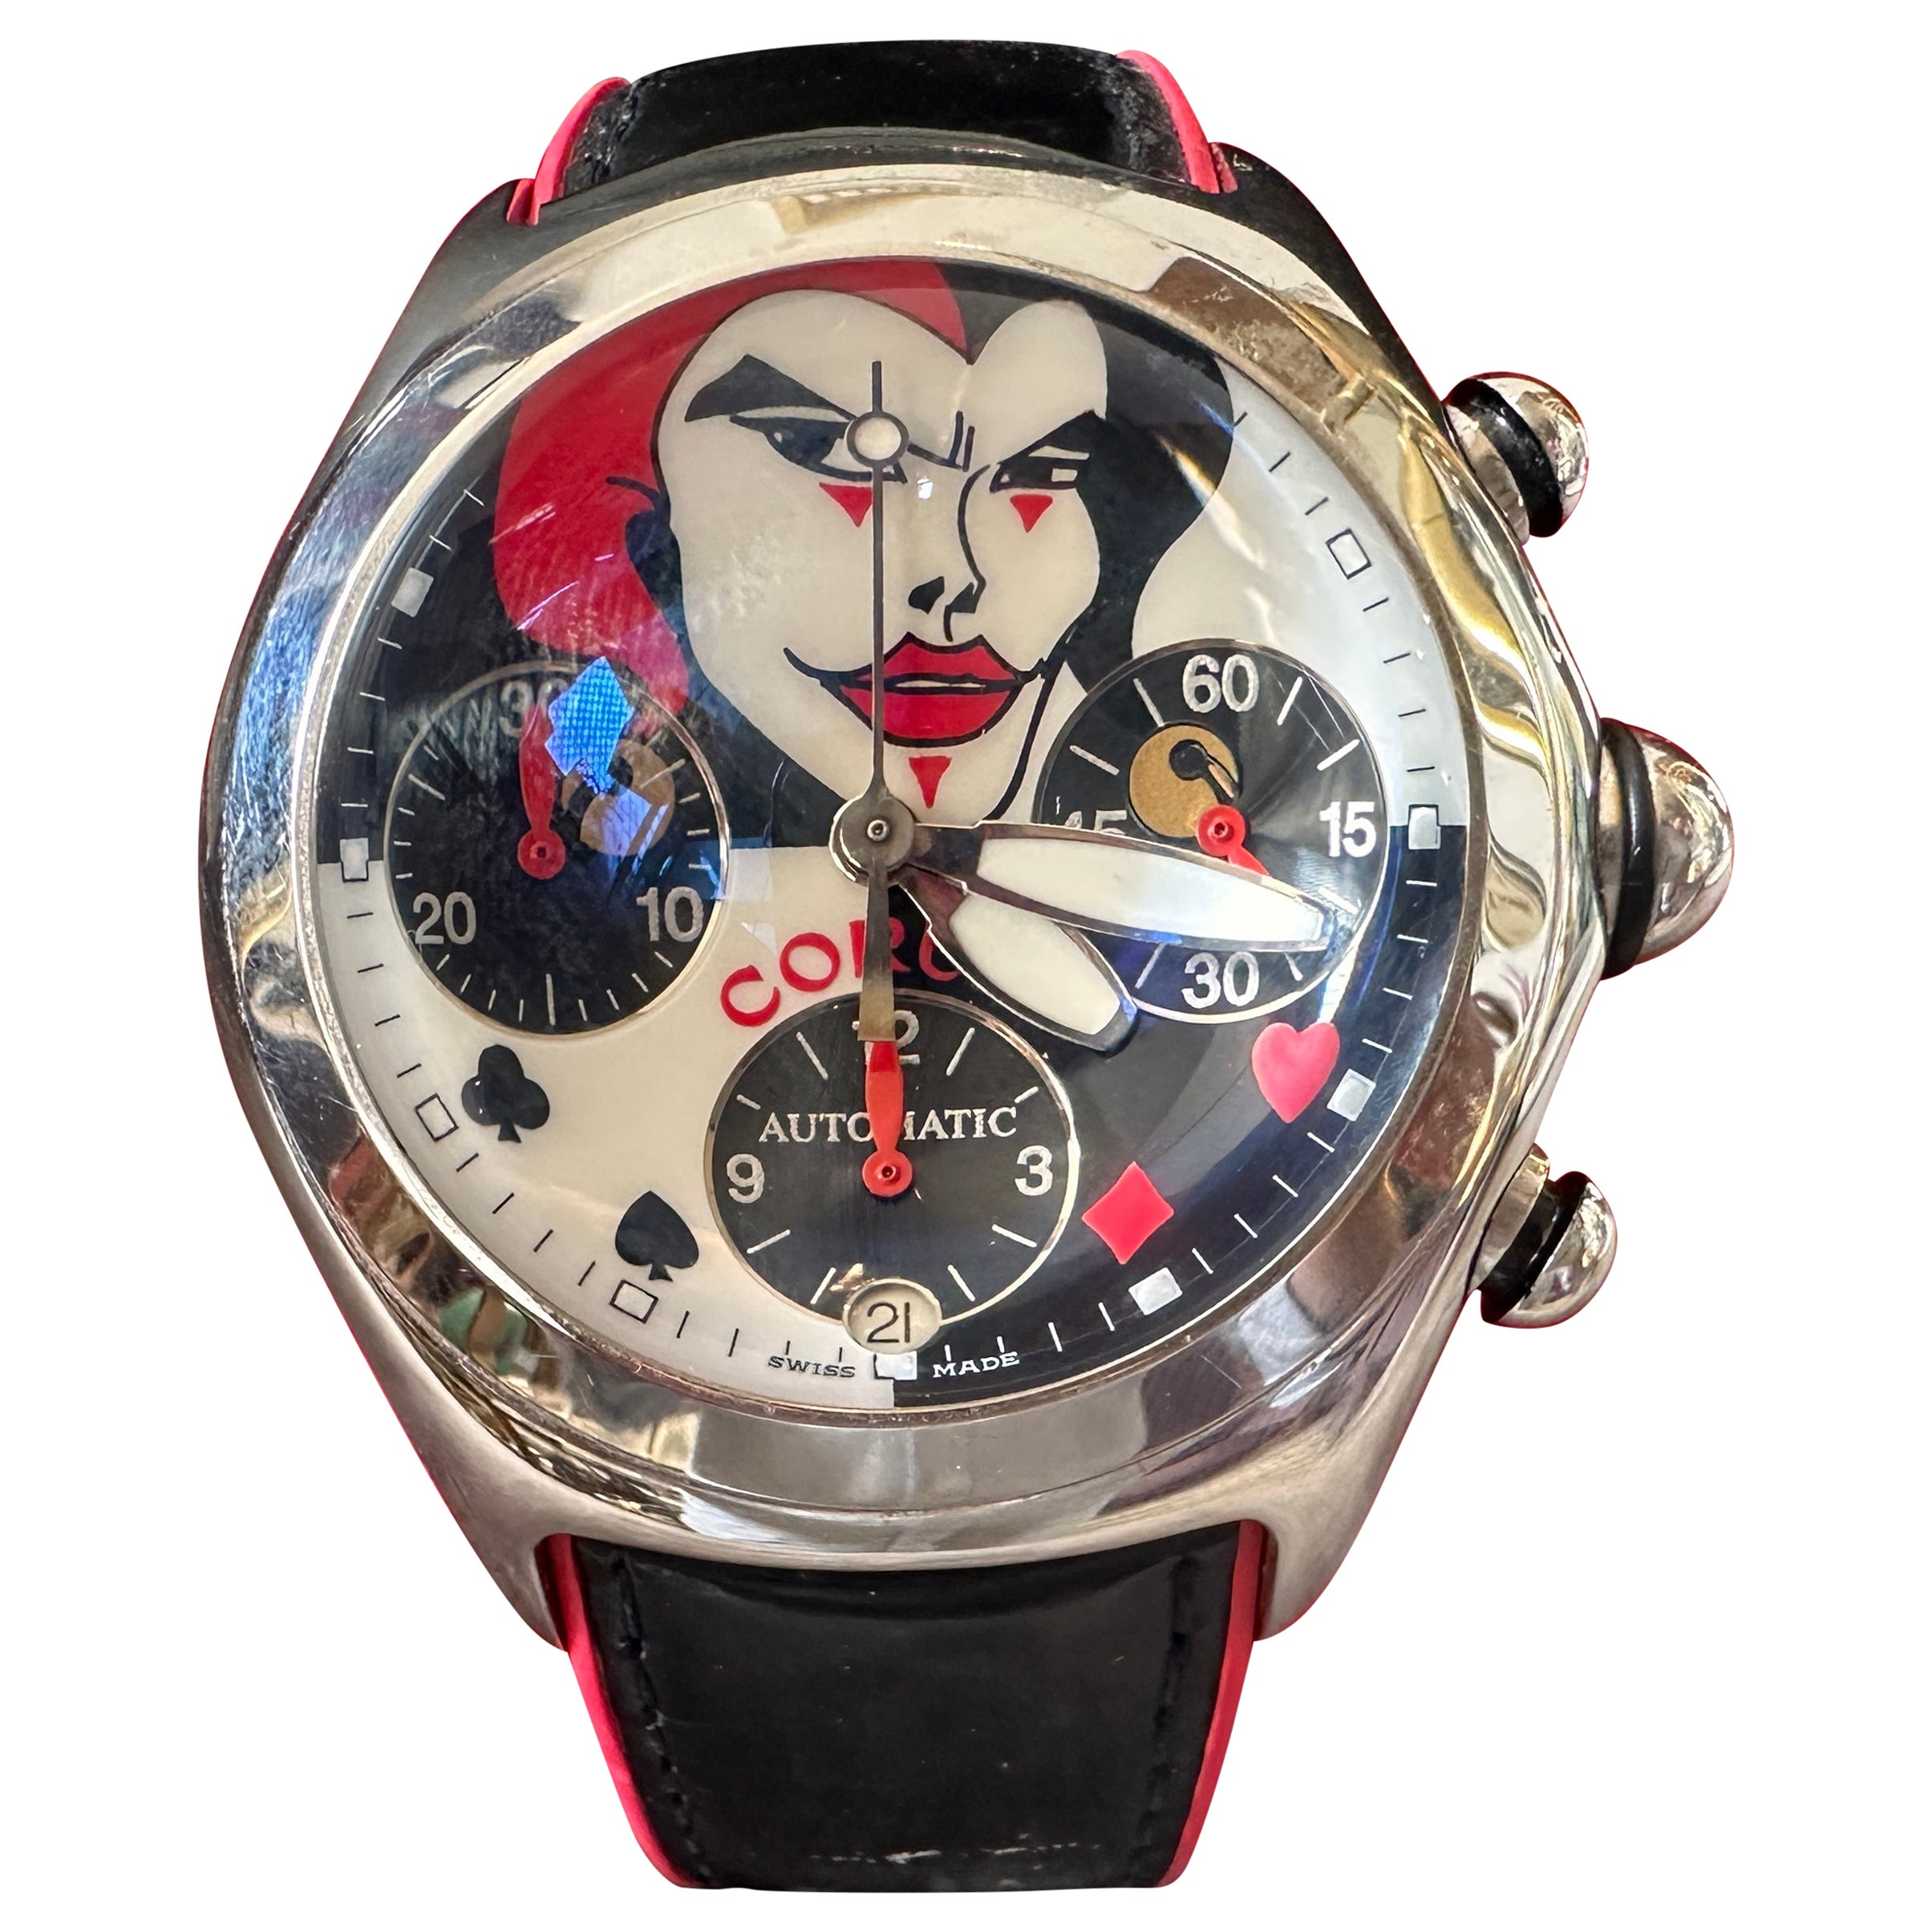 2002 Full Set Joker limited Edition Bubble Chronograph ref. 28524020 by Corum For Sale